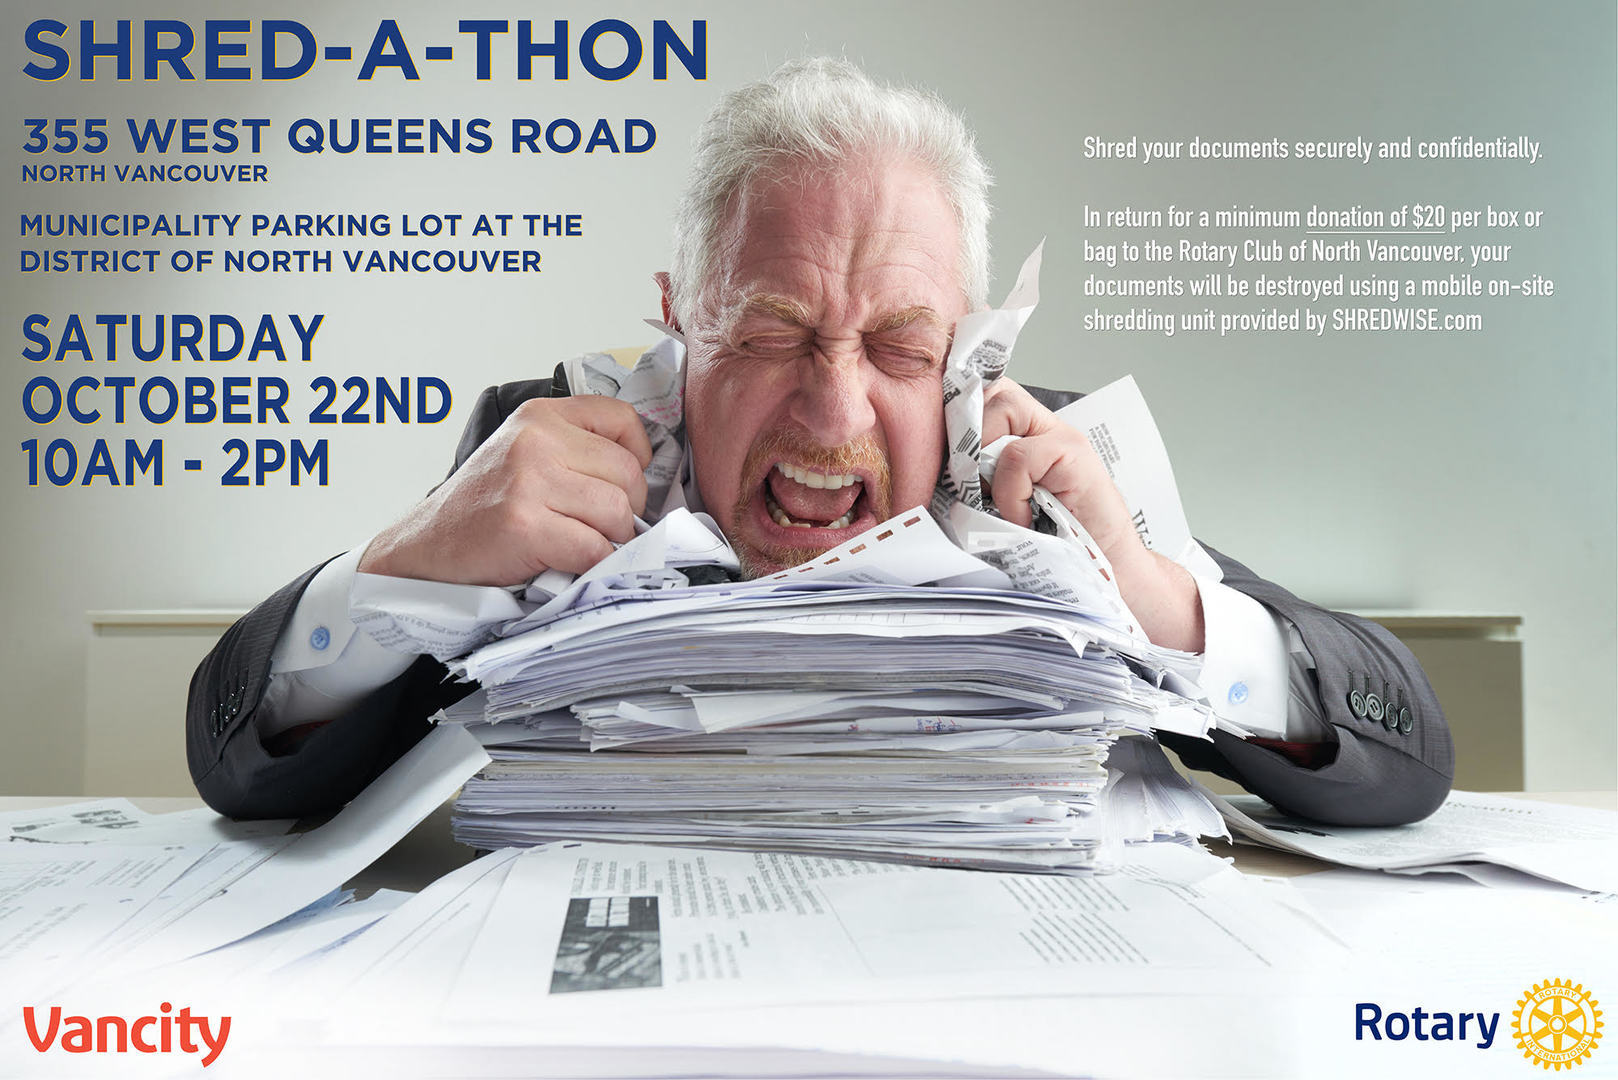 Rotary Club of North Vancouver Shred a thon, North Vancouver, British Columbia, Canada